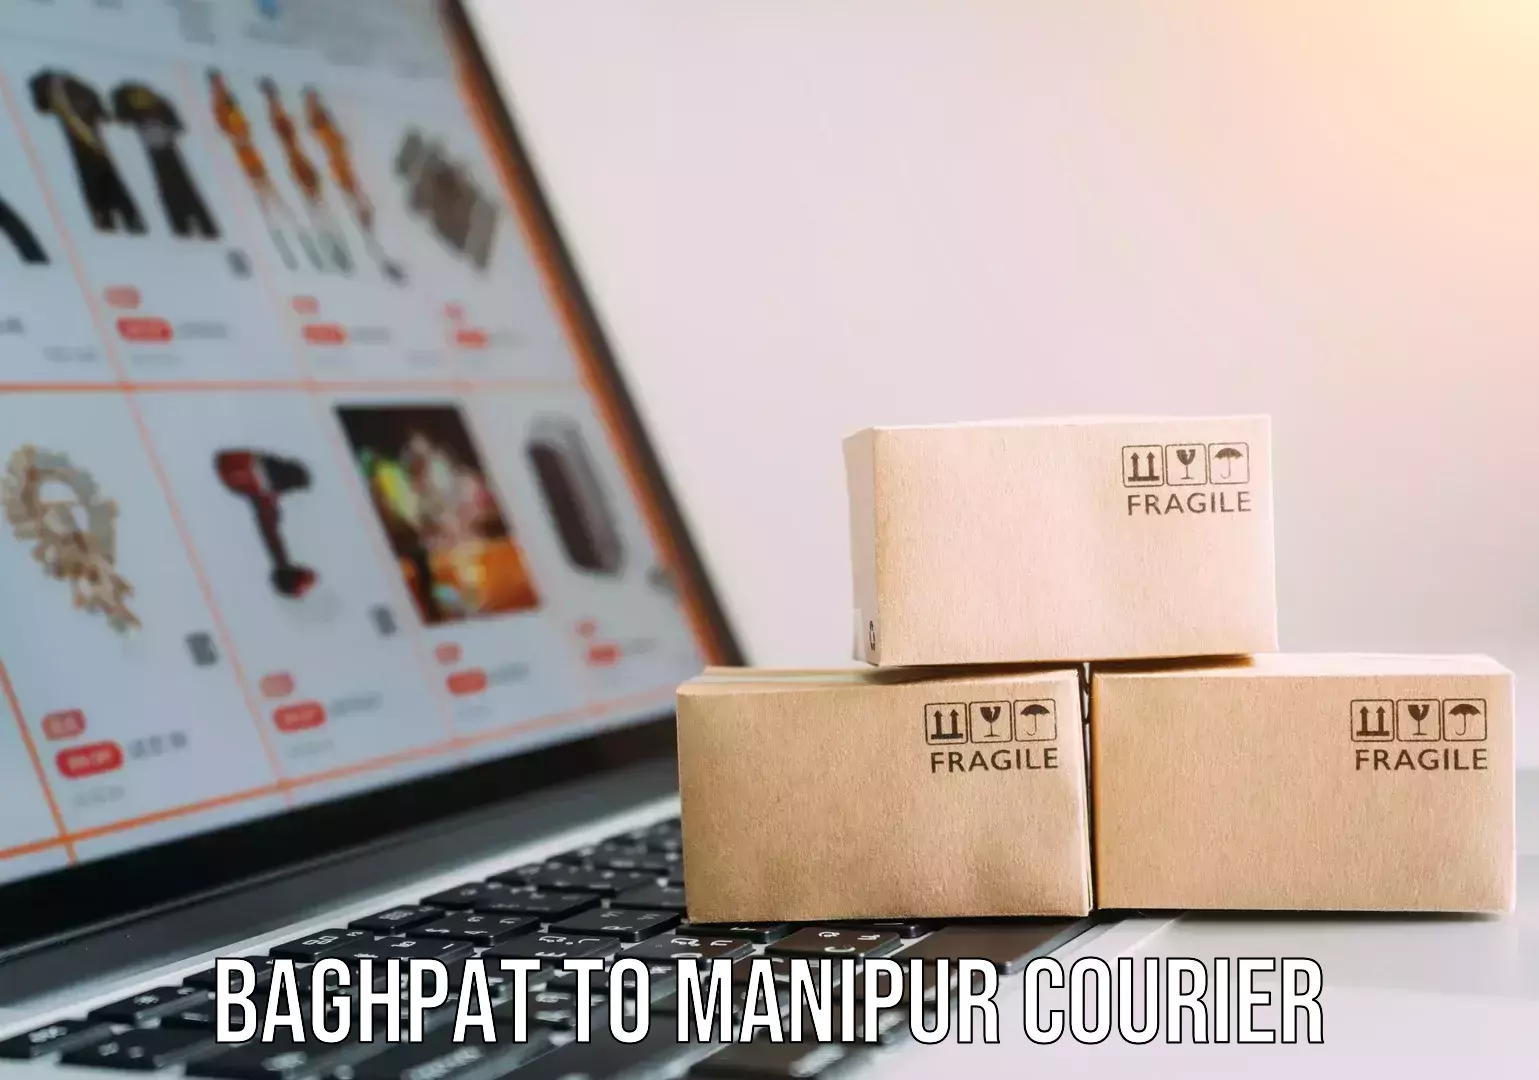 Next-day delivery options Baghpat to Manipur